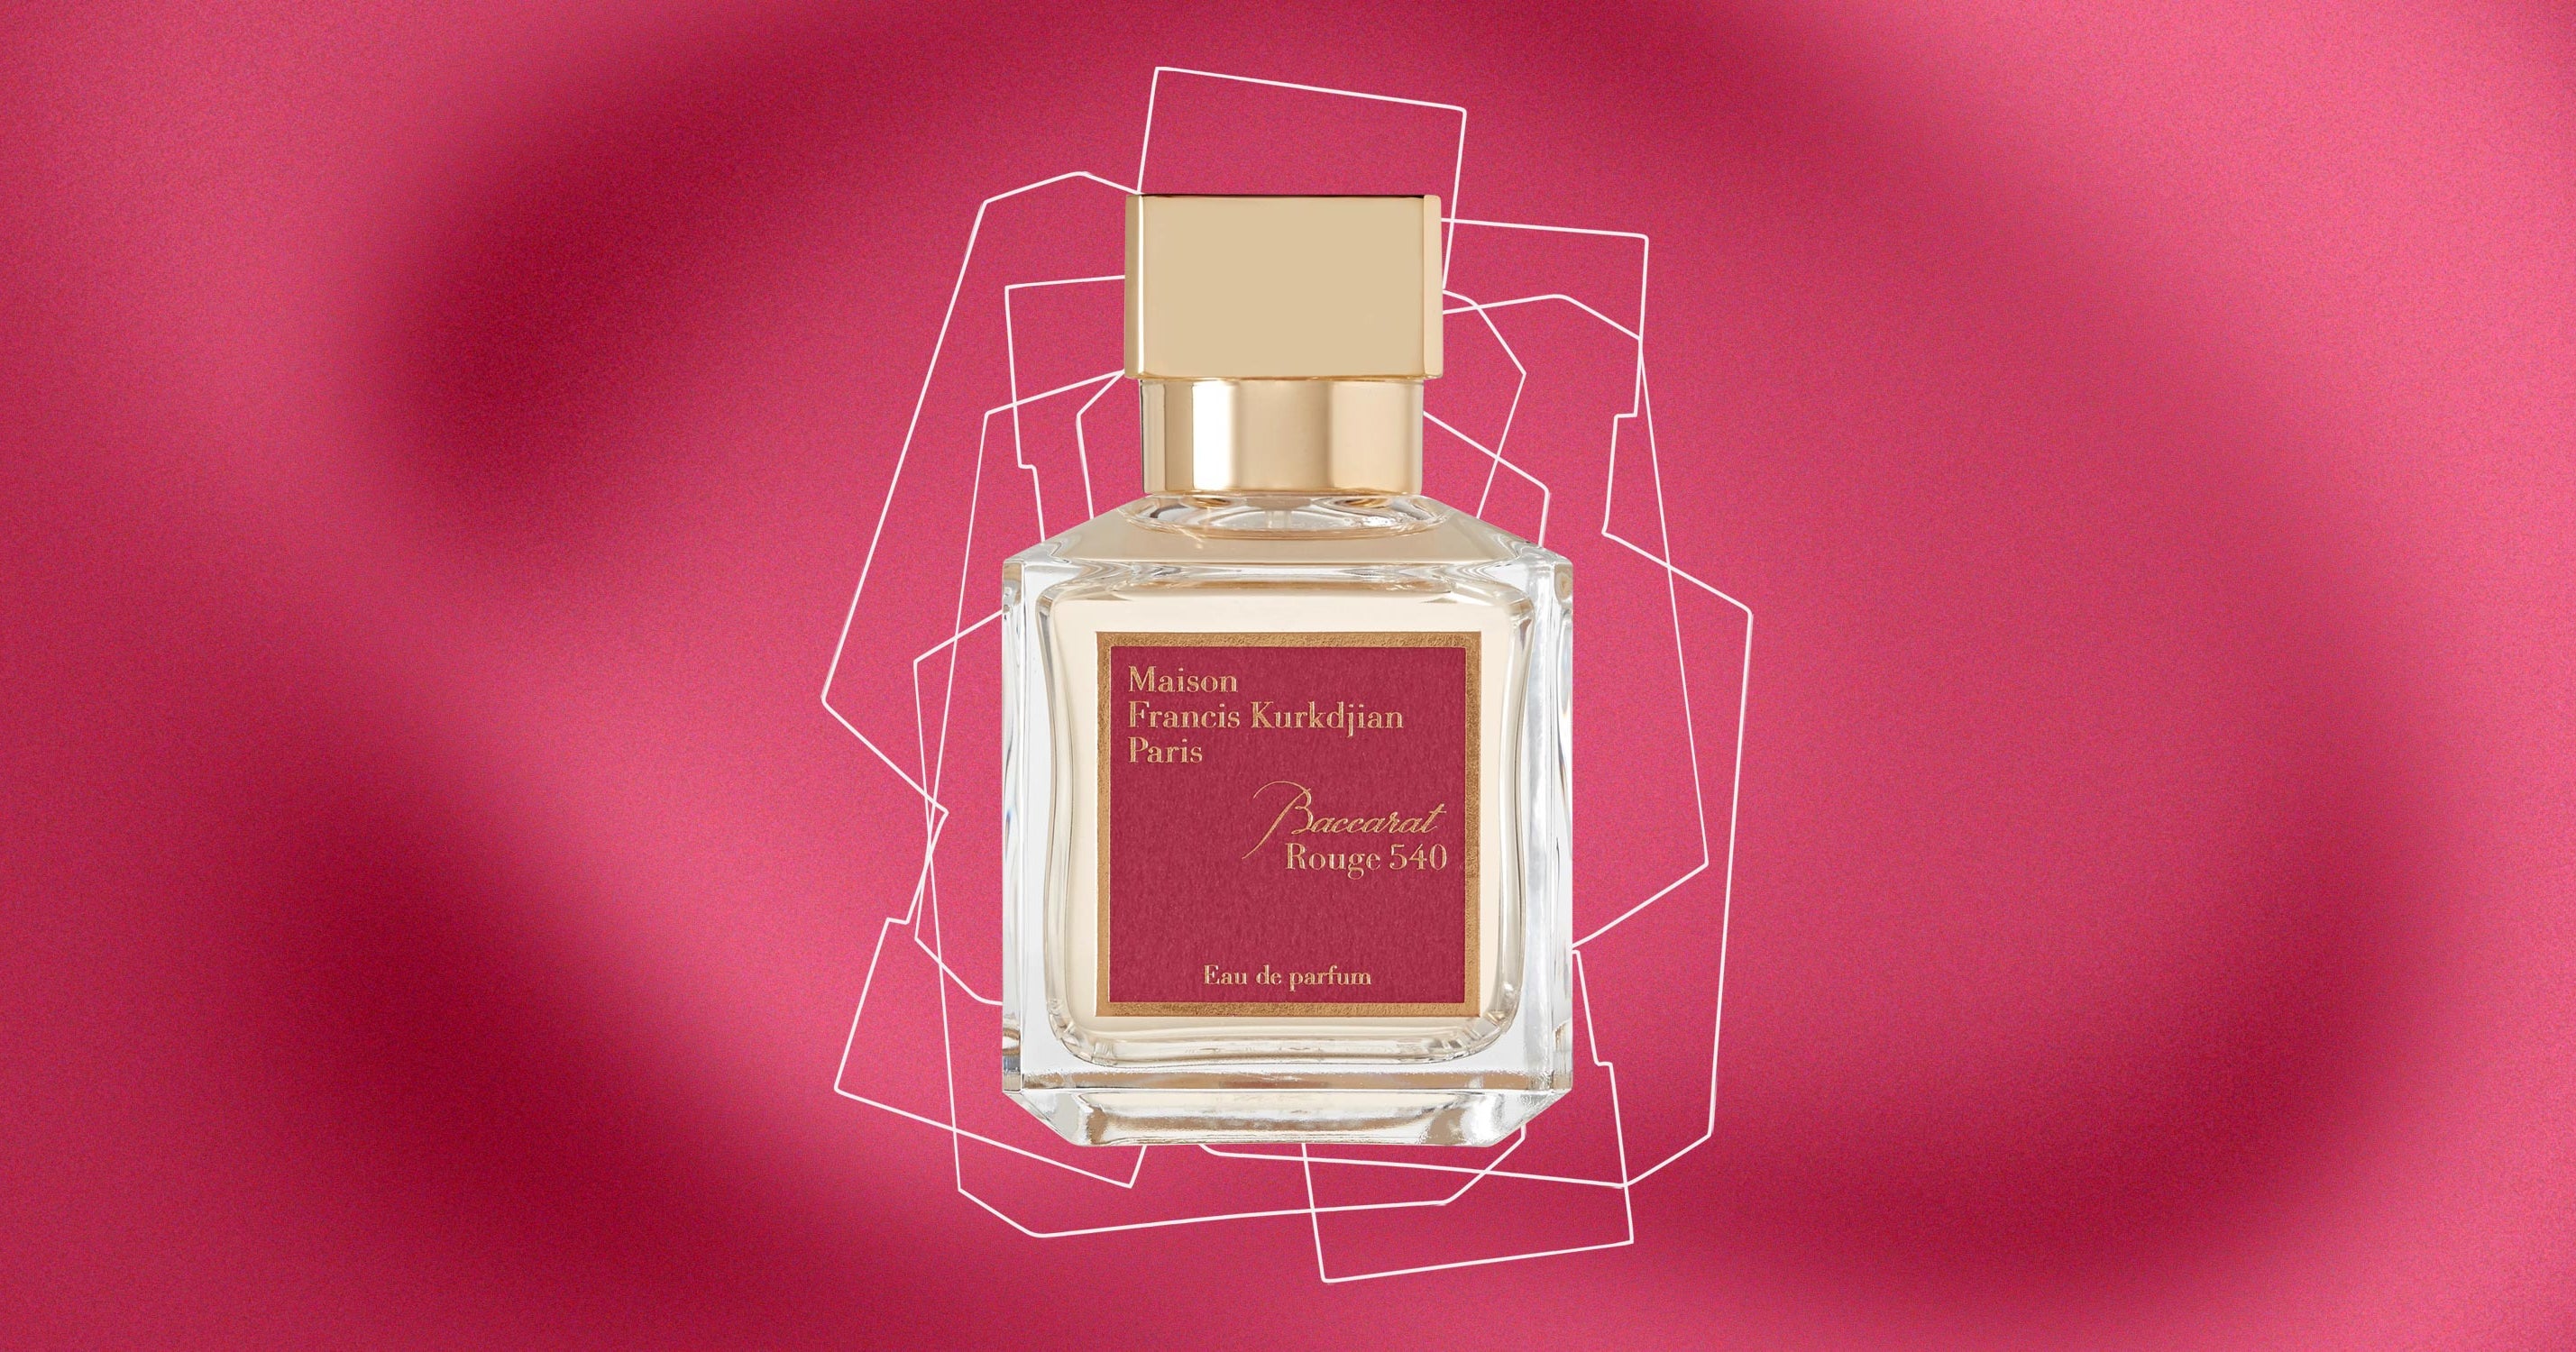 Is Baccarat Rouge Worth It? My Review Of This Luxury Perfume